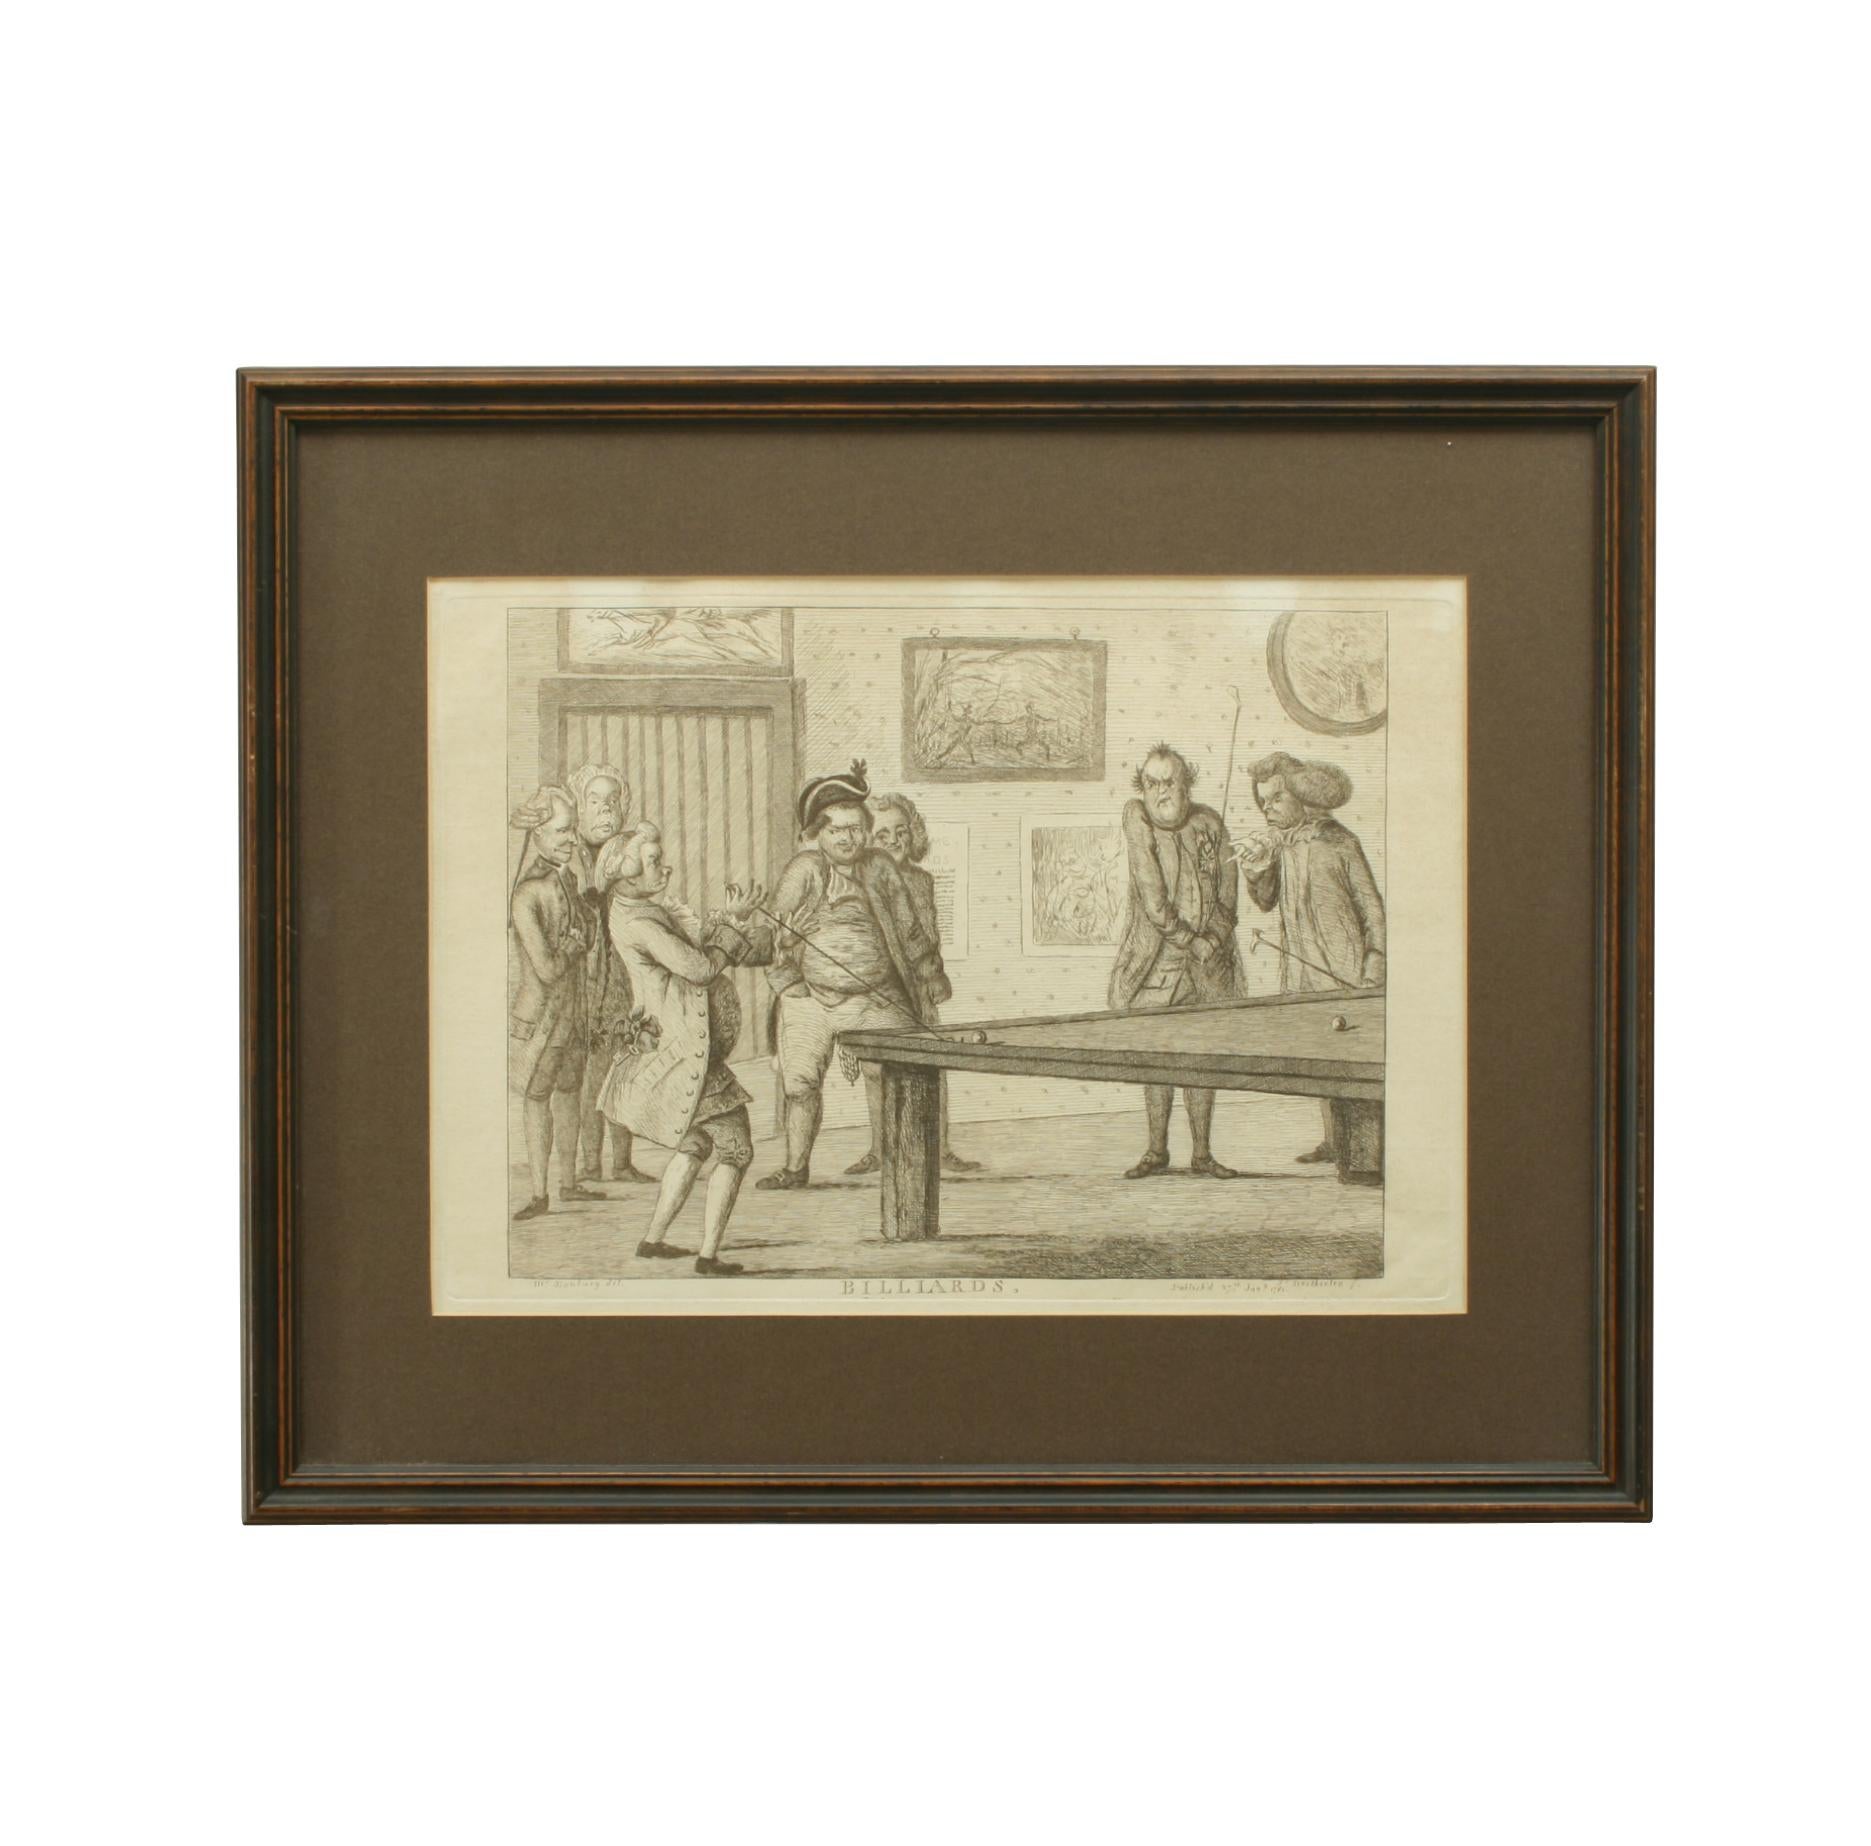 Late 18th Century Billiard Engraving after Banbury, Ideal Snooker, Pool Room Picture